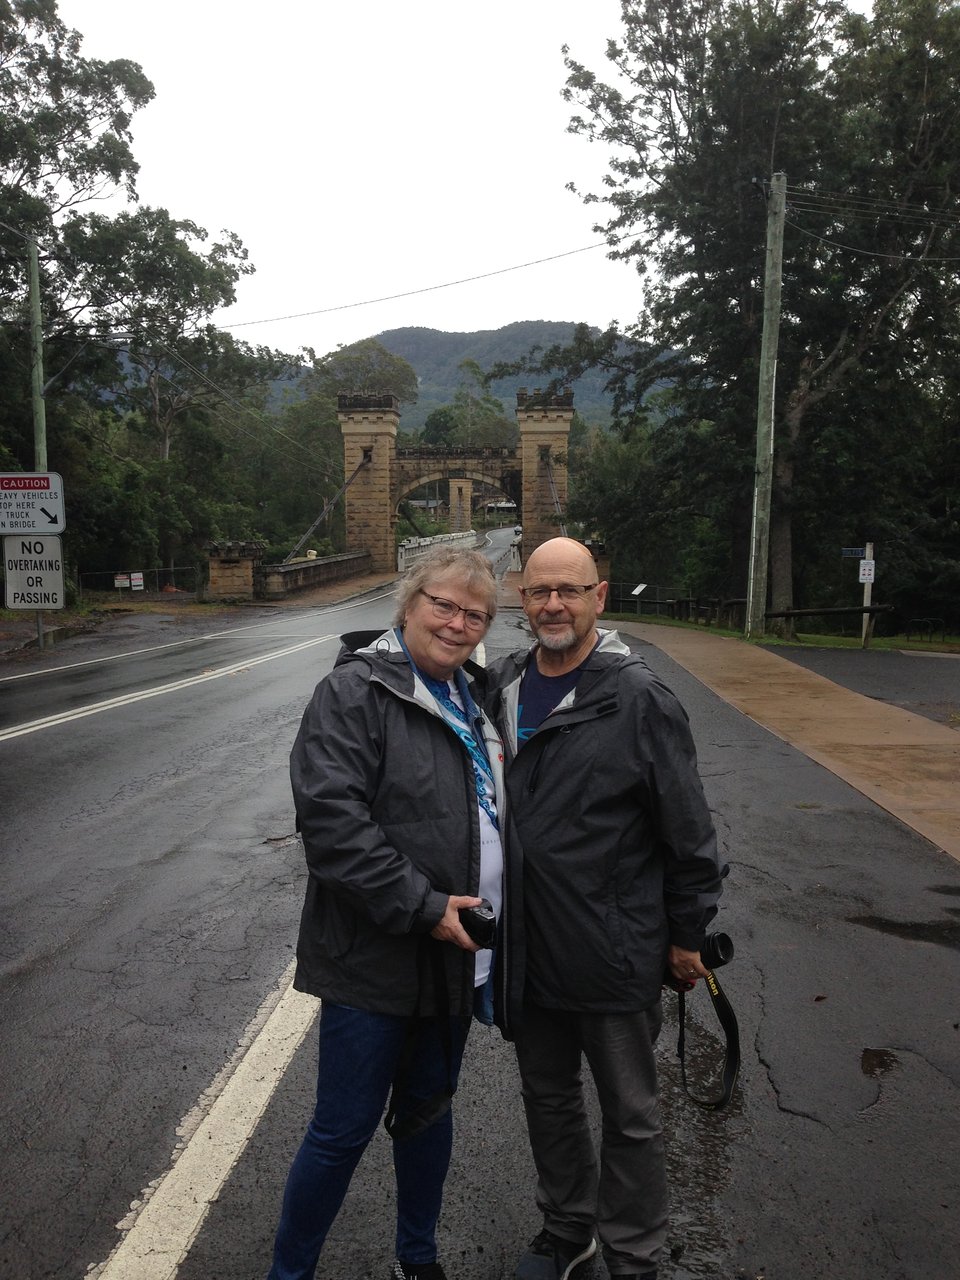 Private Day trip to Kangaroo Valley from Sydney (Southern Highland experience) 